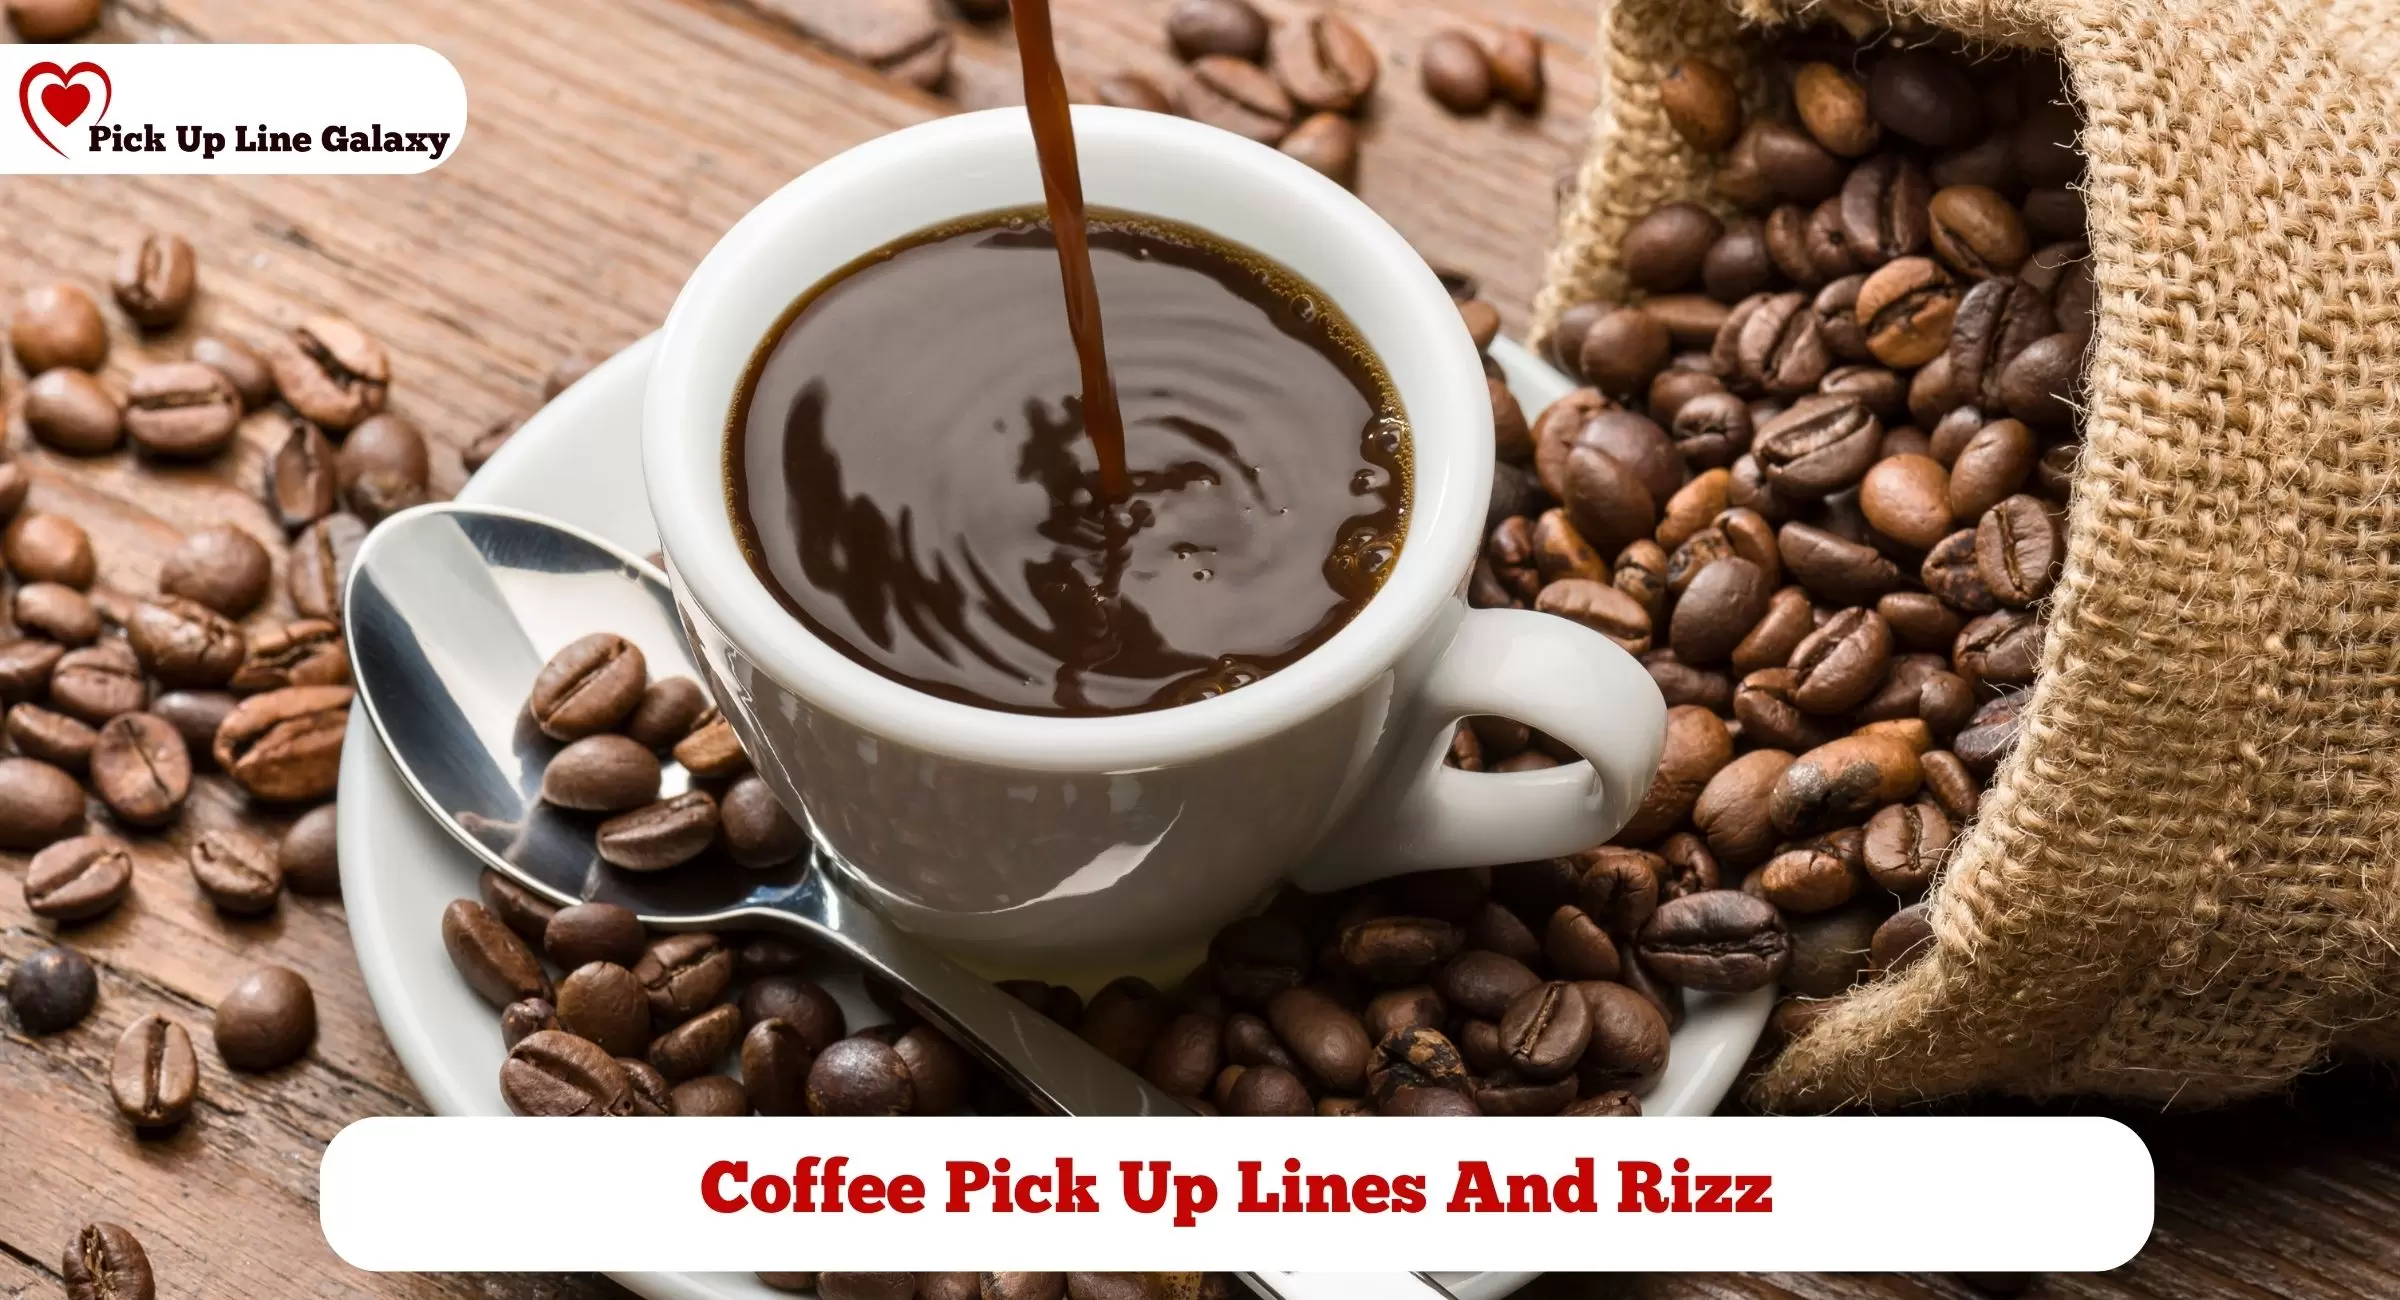 Coffee Pick Up Lines And Rizz